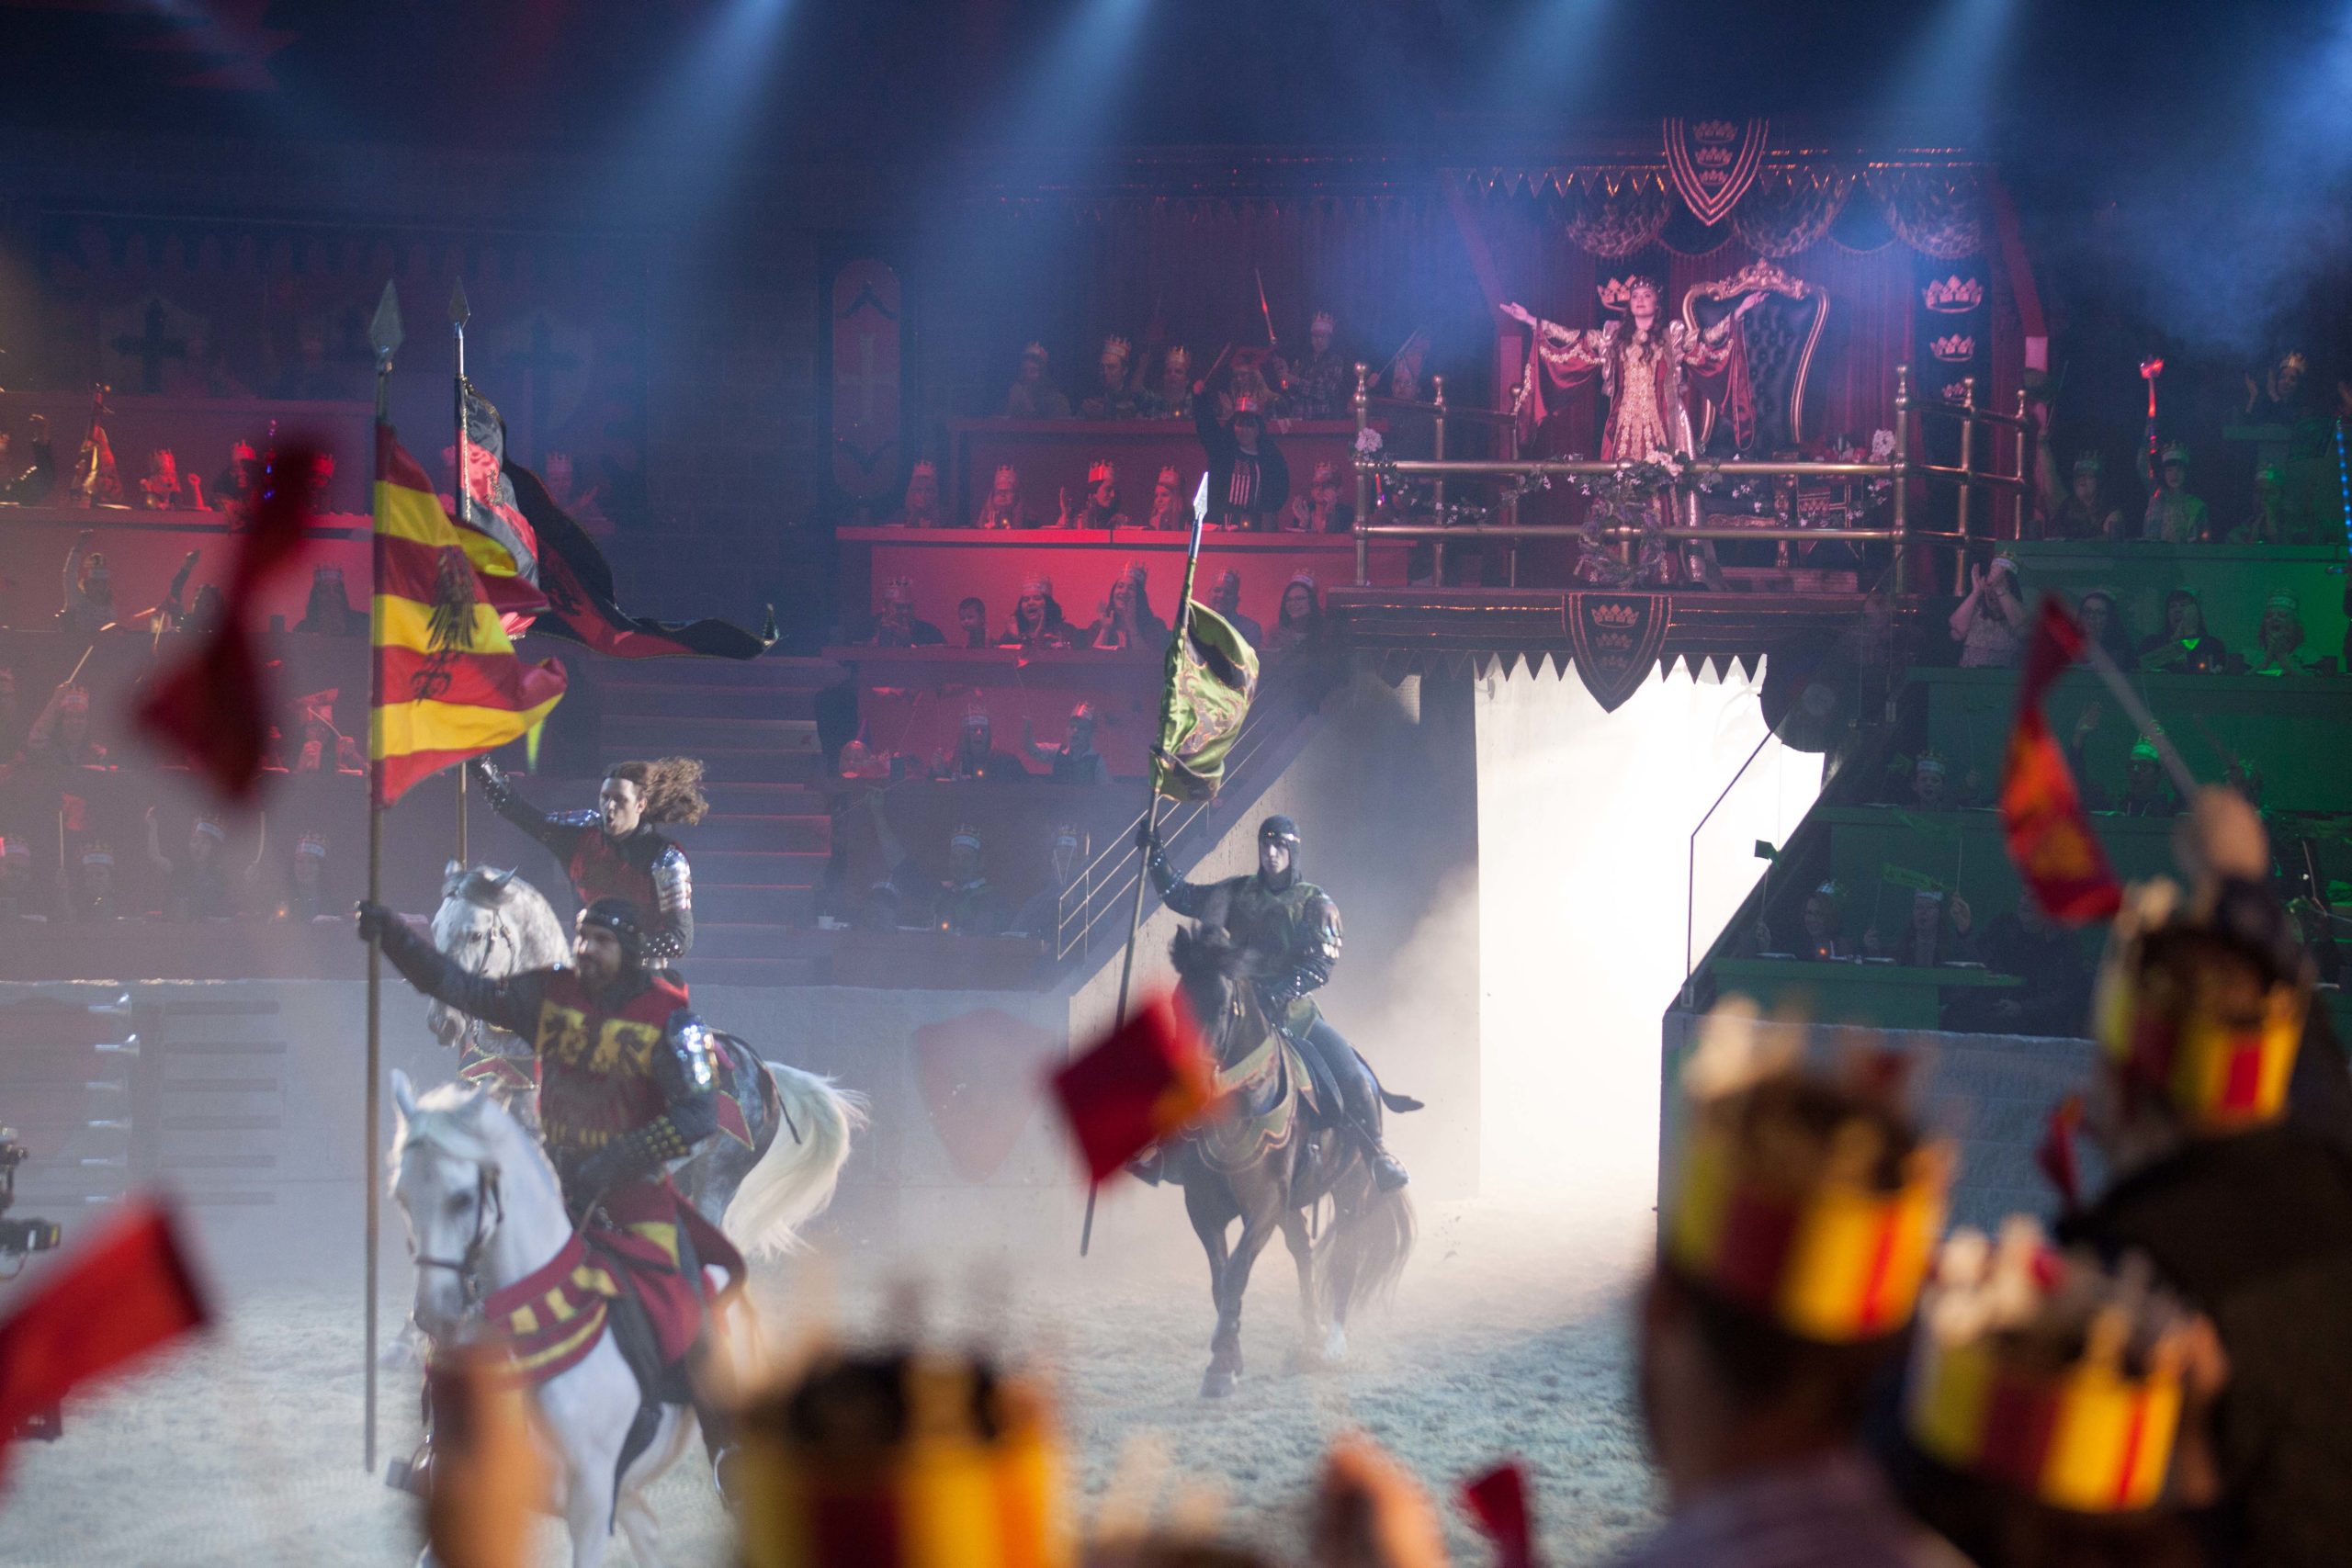 The Queen greets an arena full of guests as knights charge out